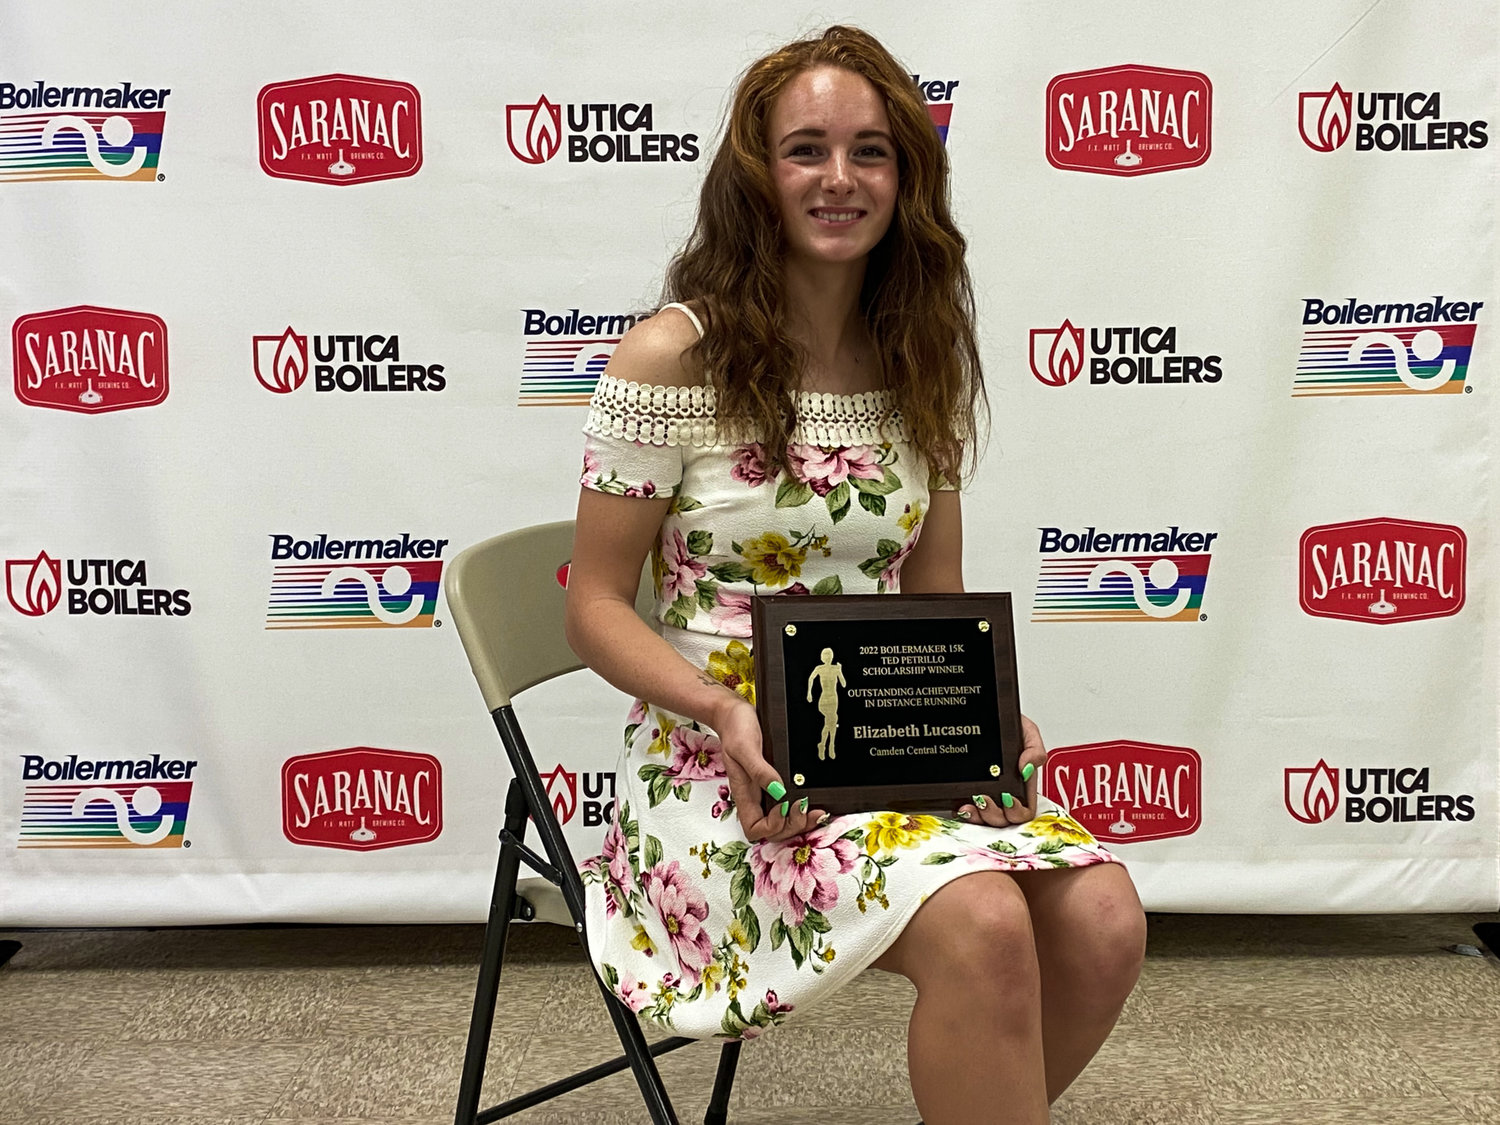 Elizabeth Lucason, winner of the 2022 Boilermaker Road Race Ted Petrillo Scholarship for Outstanding Achievement in Distance Running.